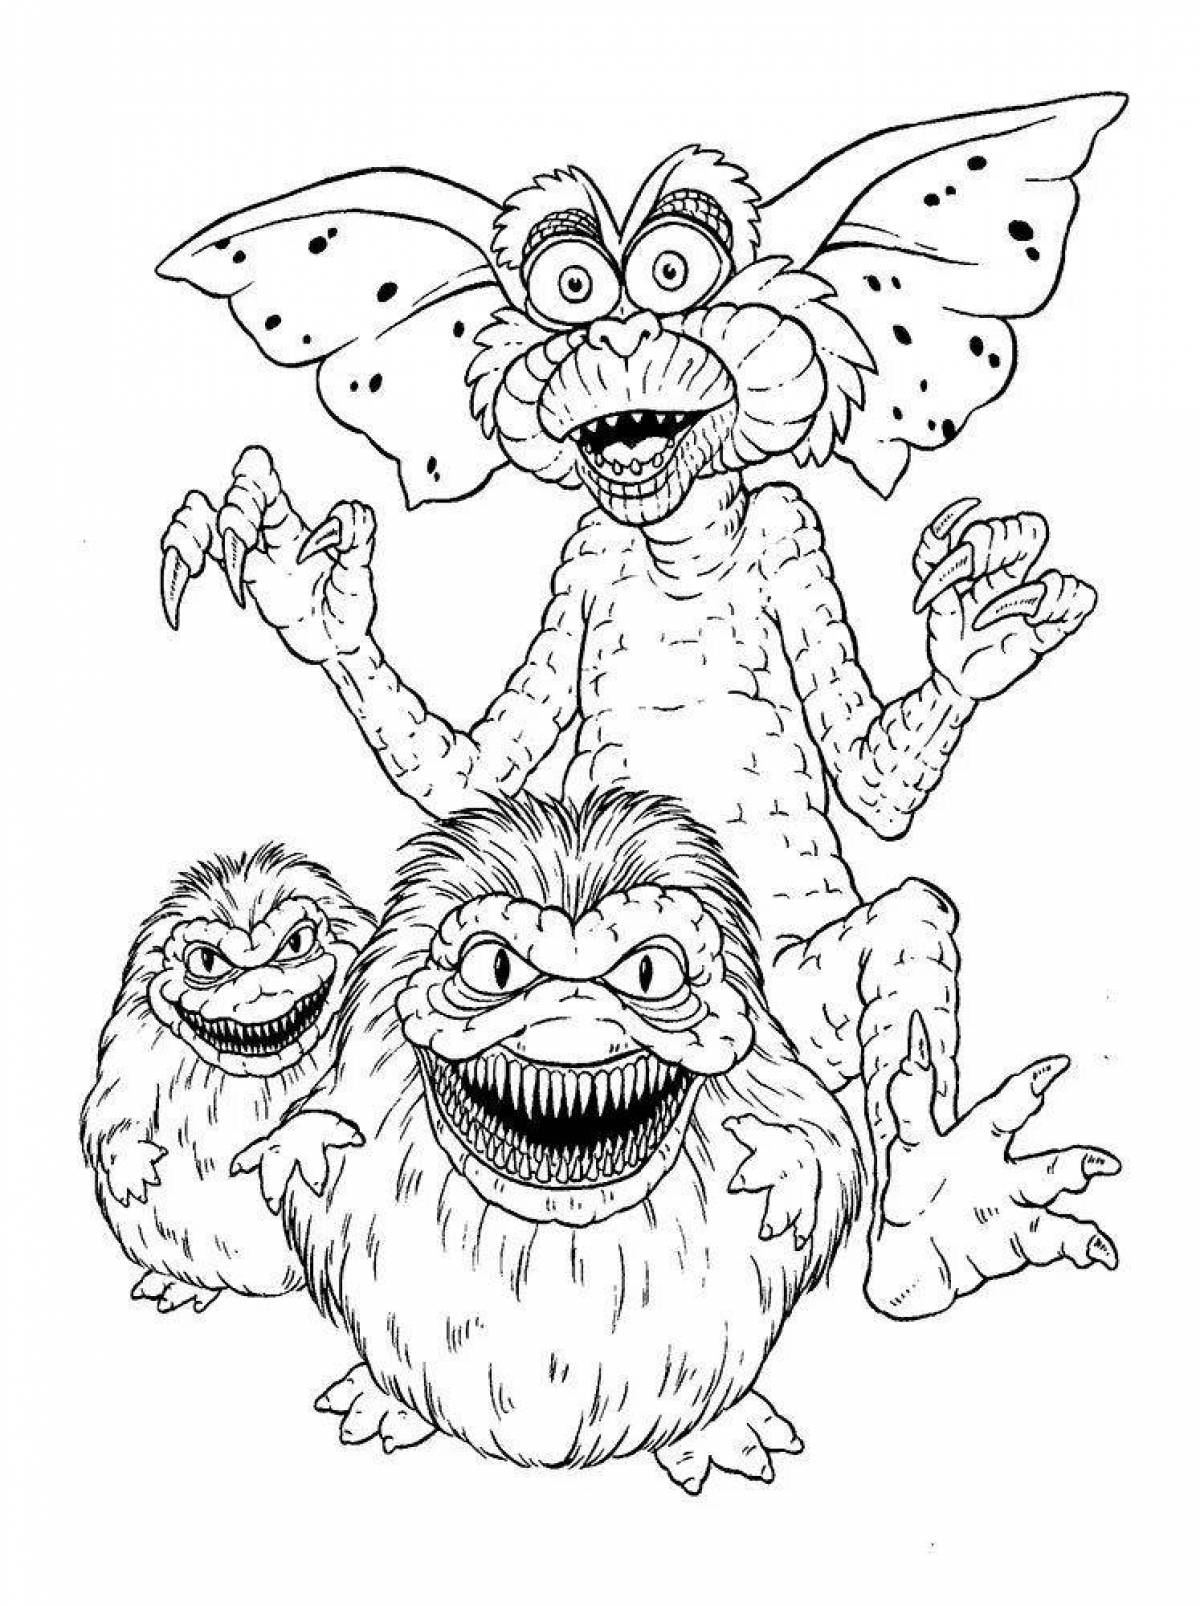 Terrible scary monsters coloring page